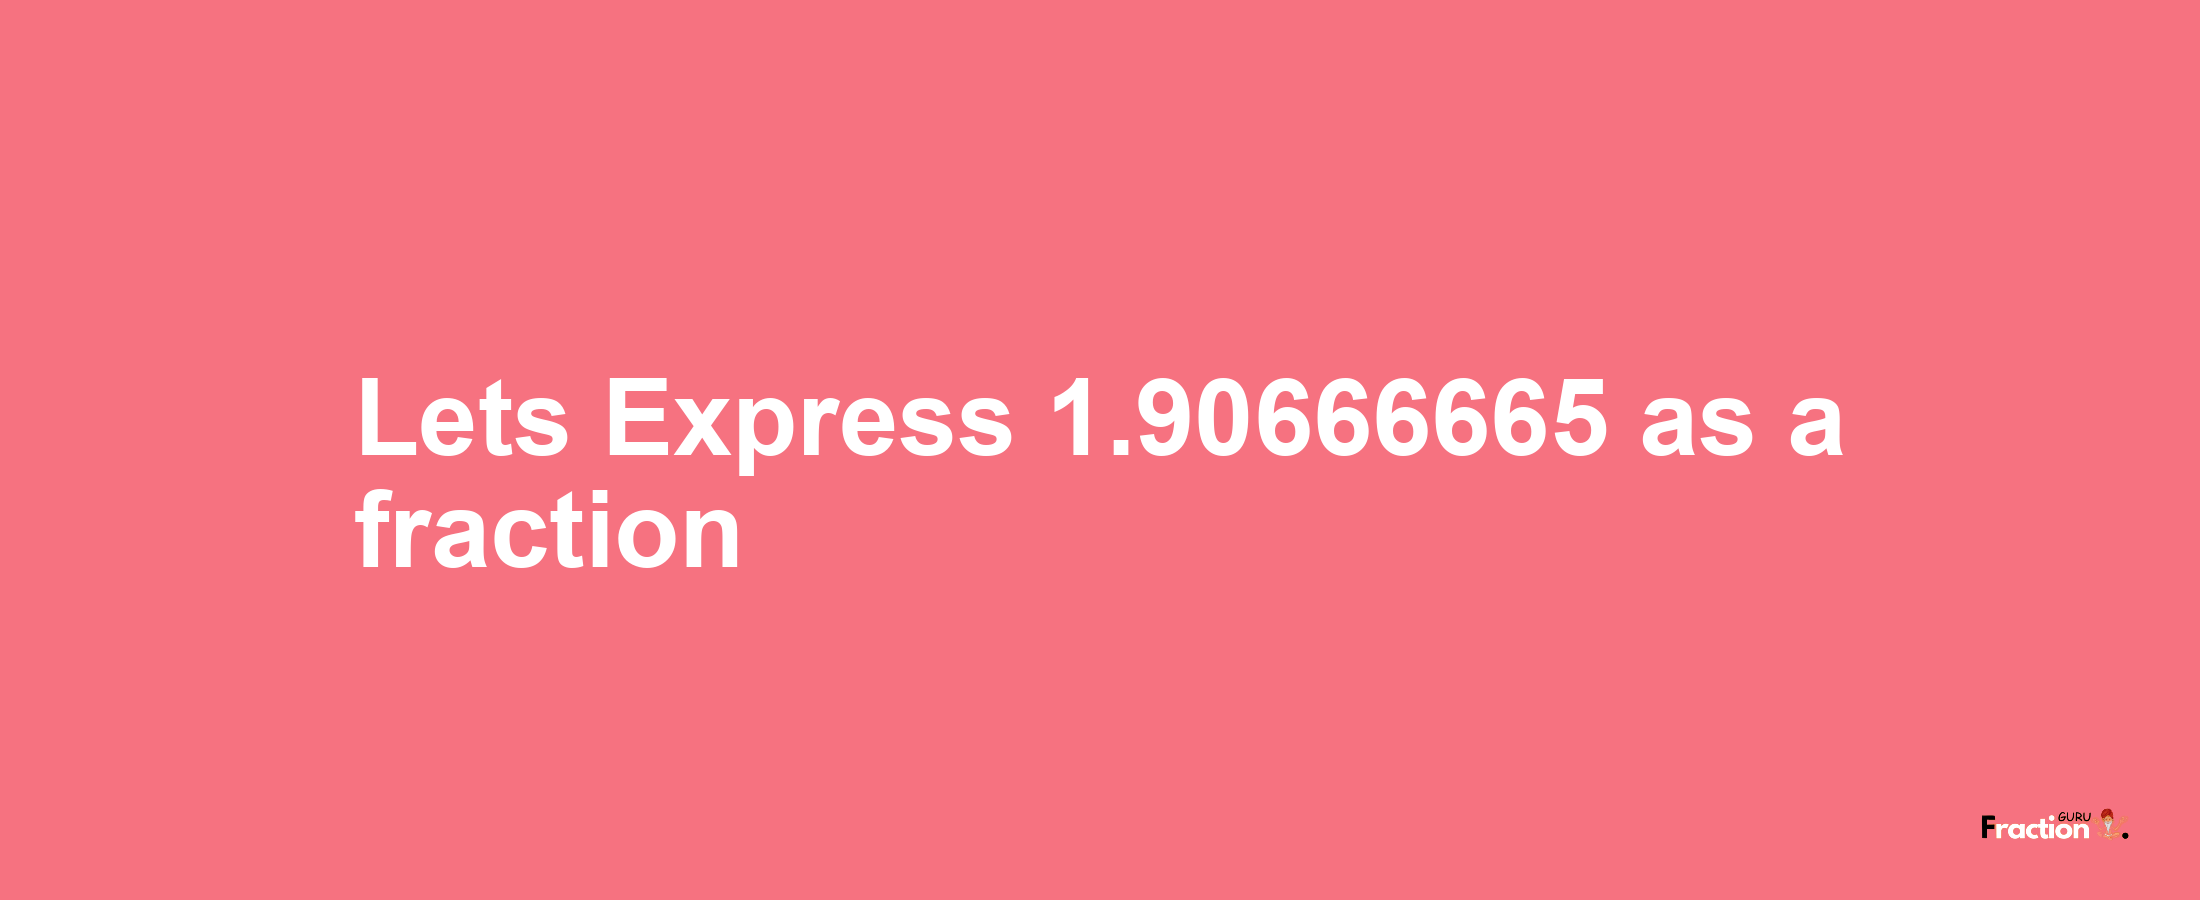 Lets Express 1.90666665 as afraction